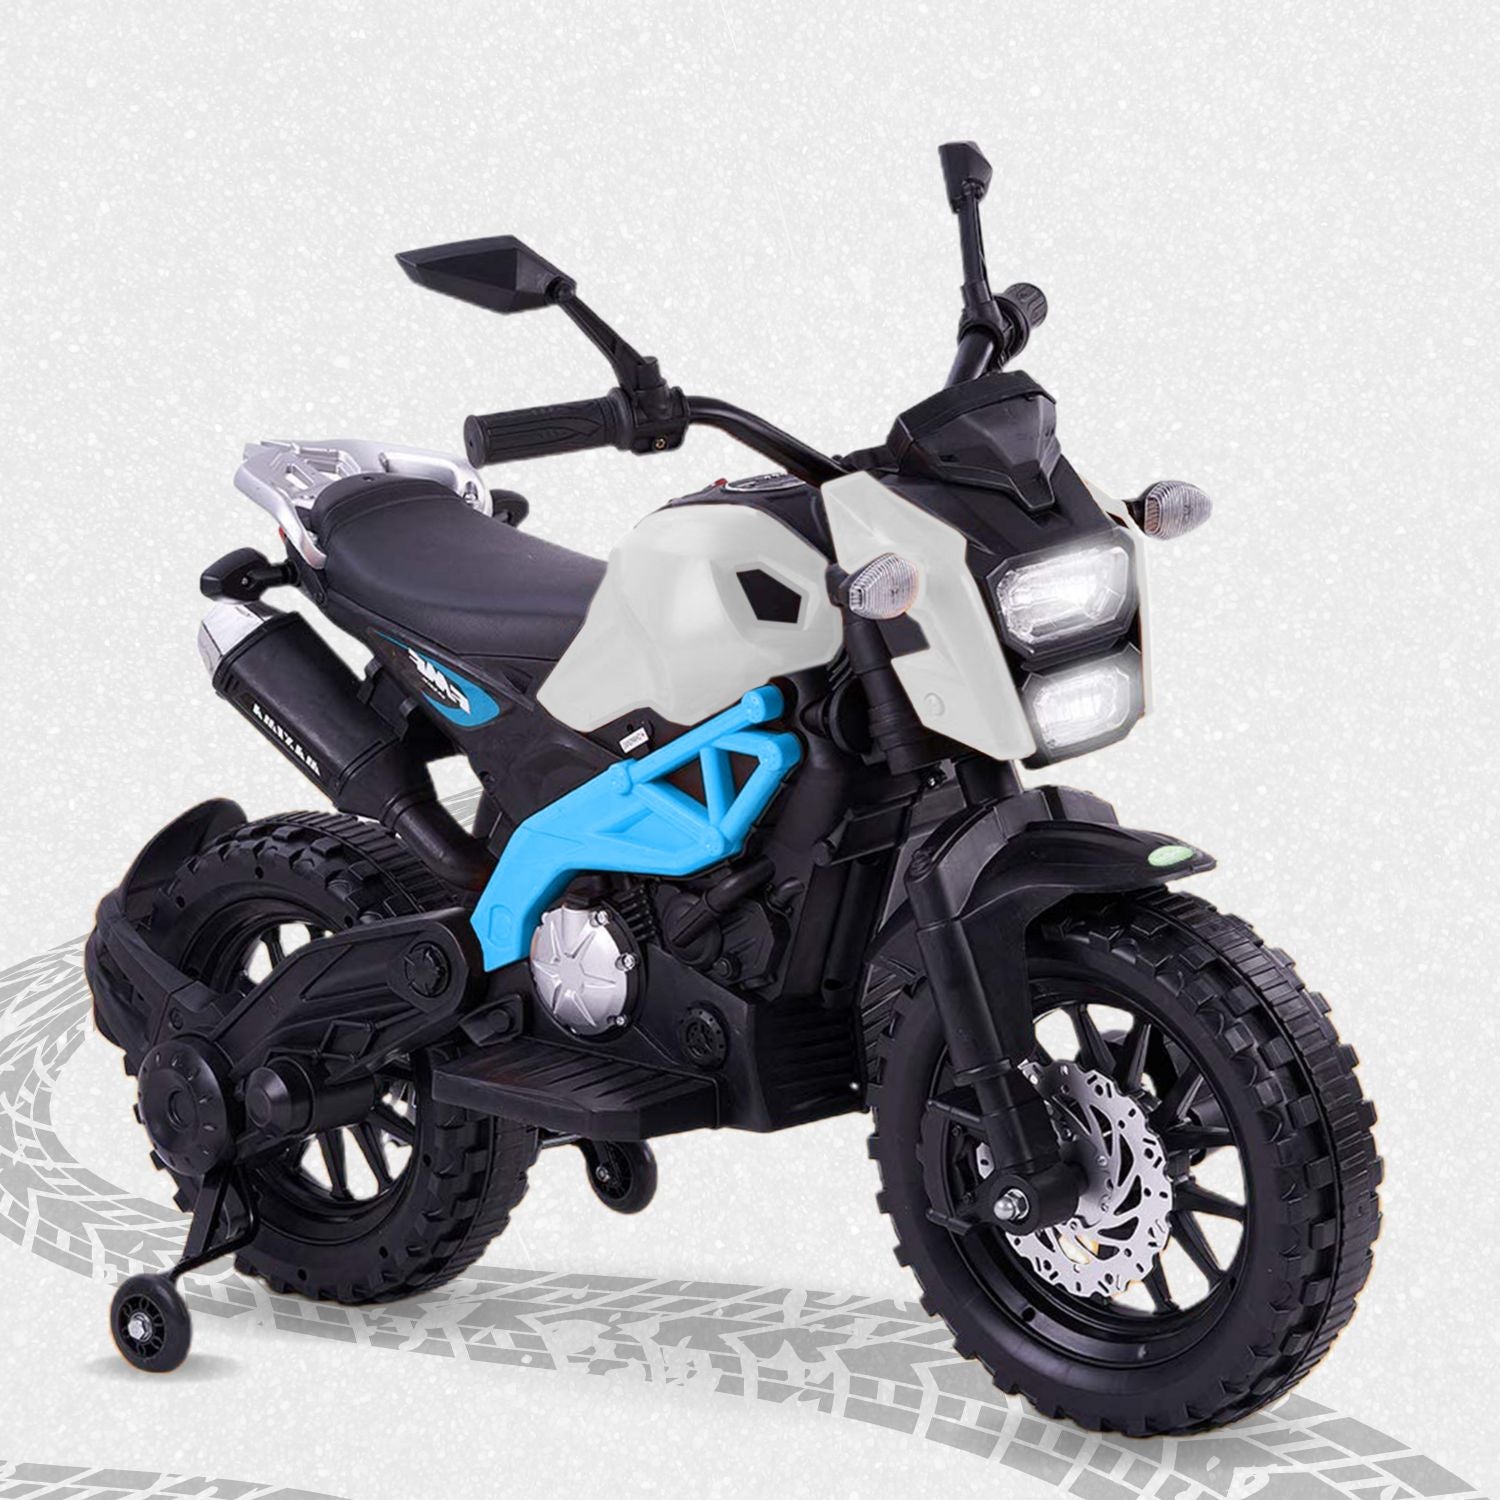 Baby Moo Electric Ride-on Bike for Kids | Battery-Powered Toy with LED Lights, Music, and USB Port | Battery Operated Bike - Blue - Baby Moo